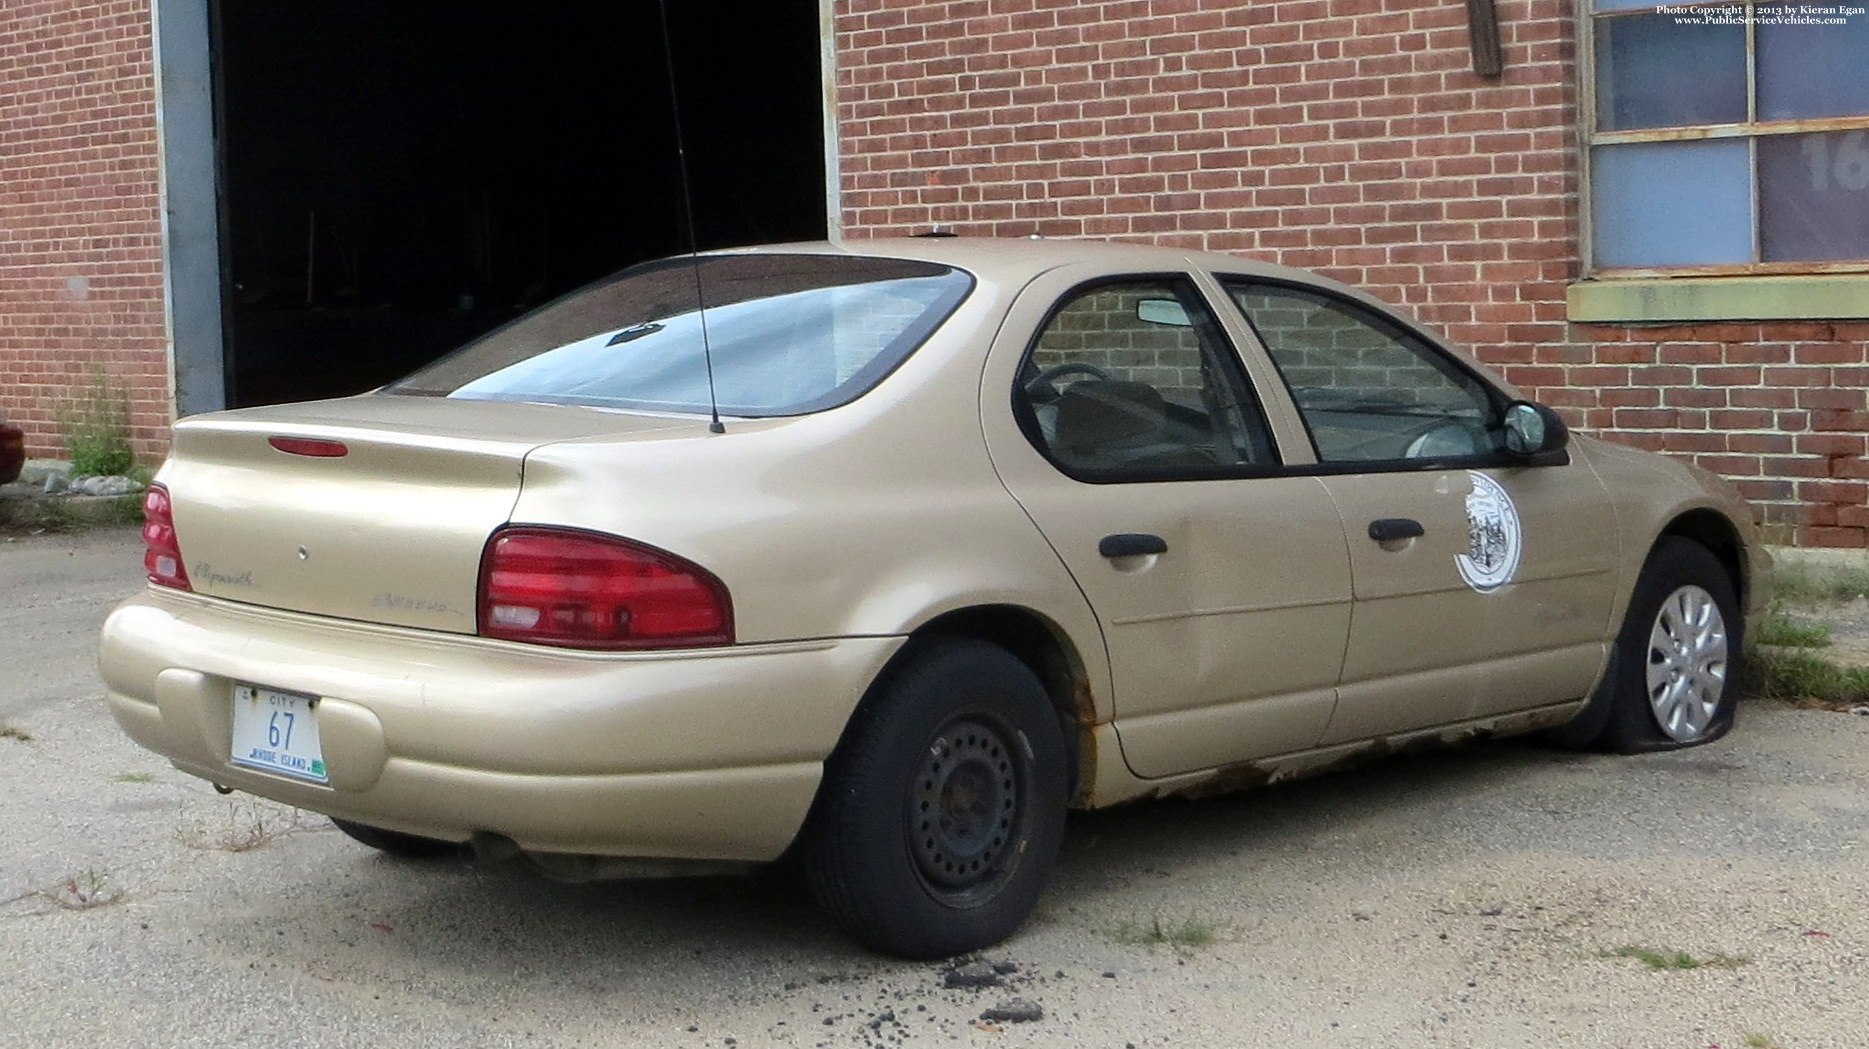 A photo  of Providence Sewer Division
            Car 67, a 1996-2000 Plymouth Breeze             taken by Kieran Egan